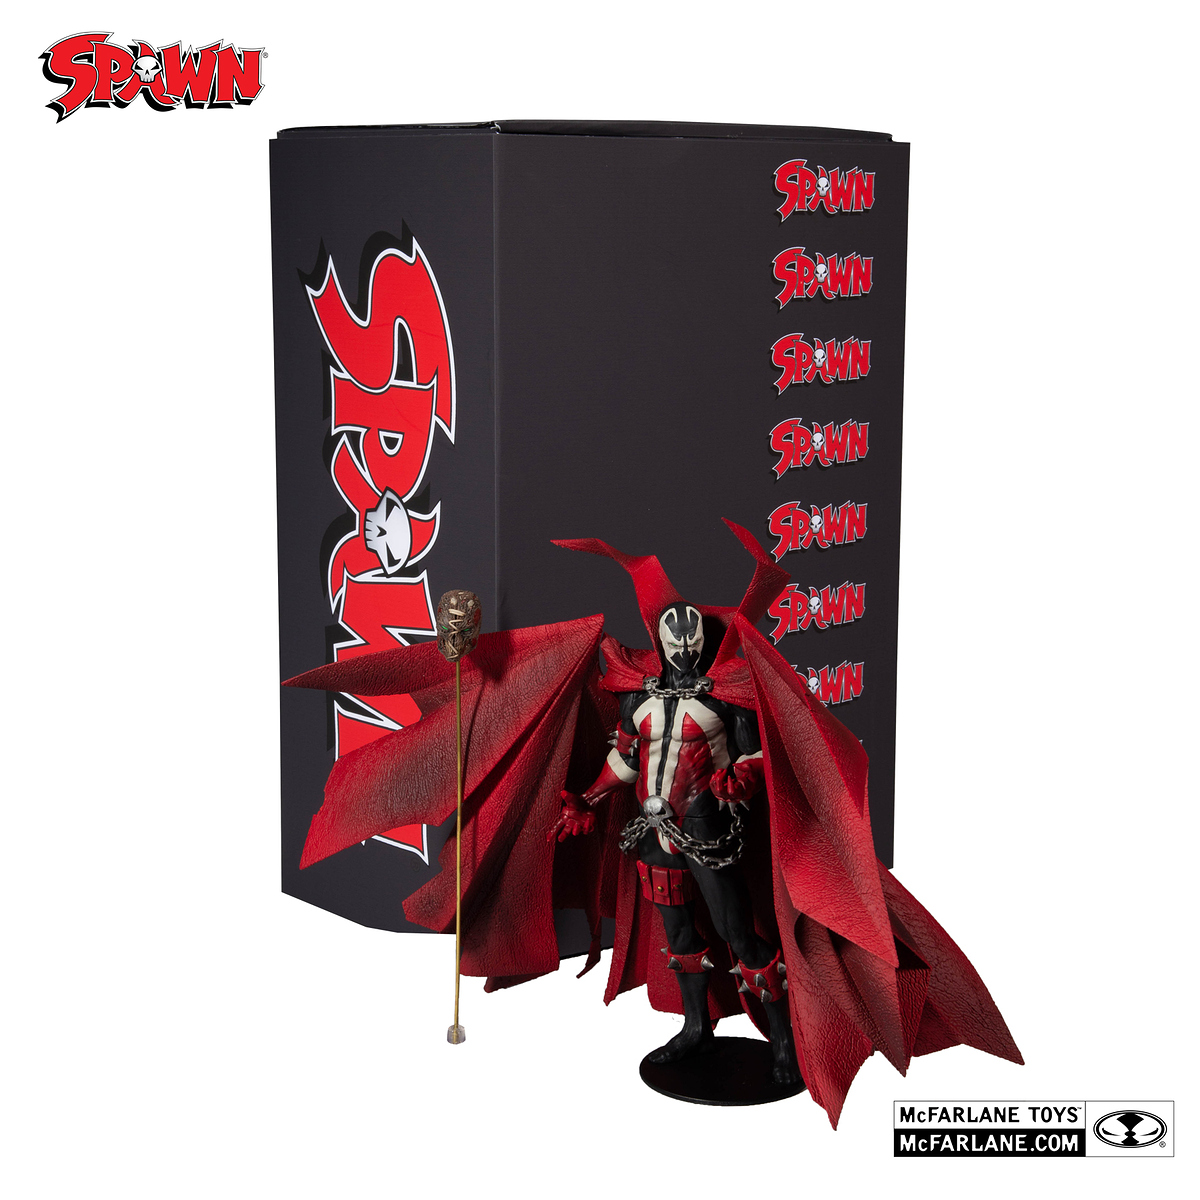 Original Spawn Comic and Toy Remastered (2020) Packaging2